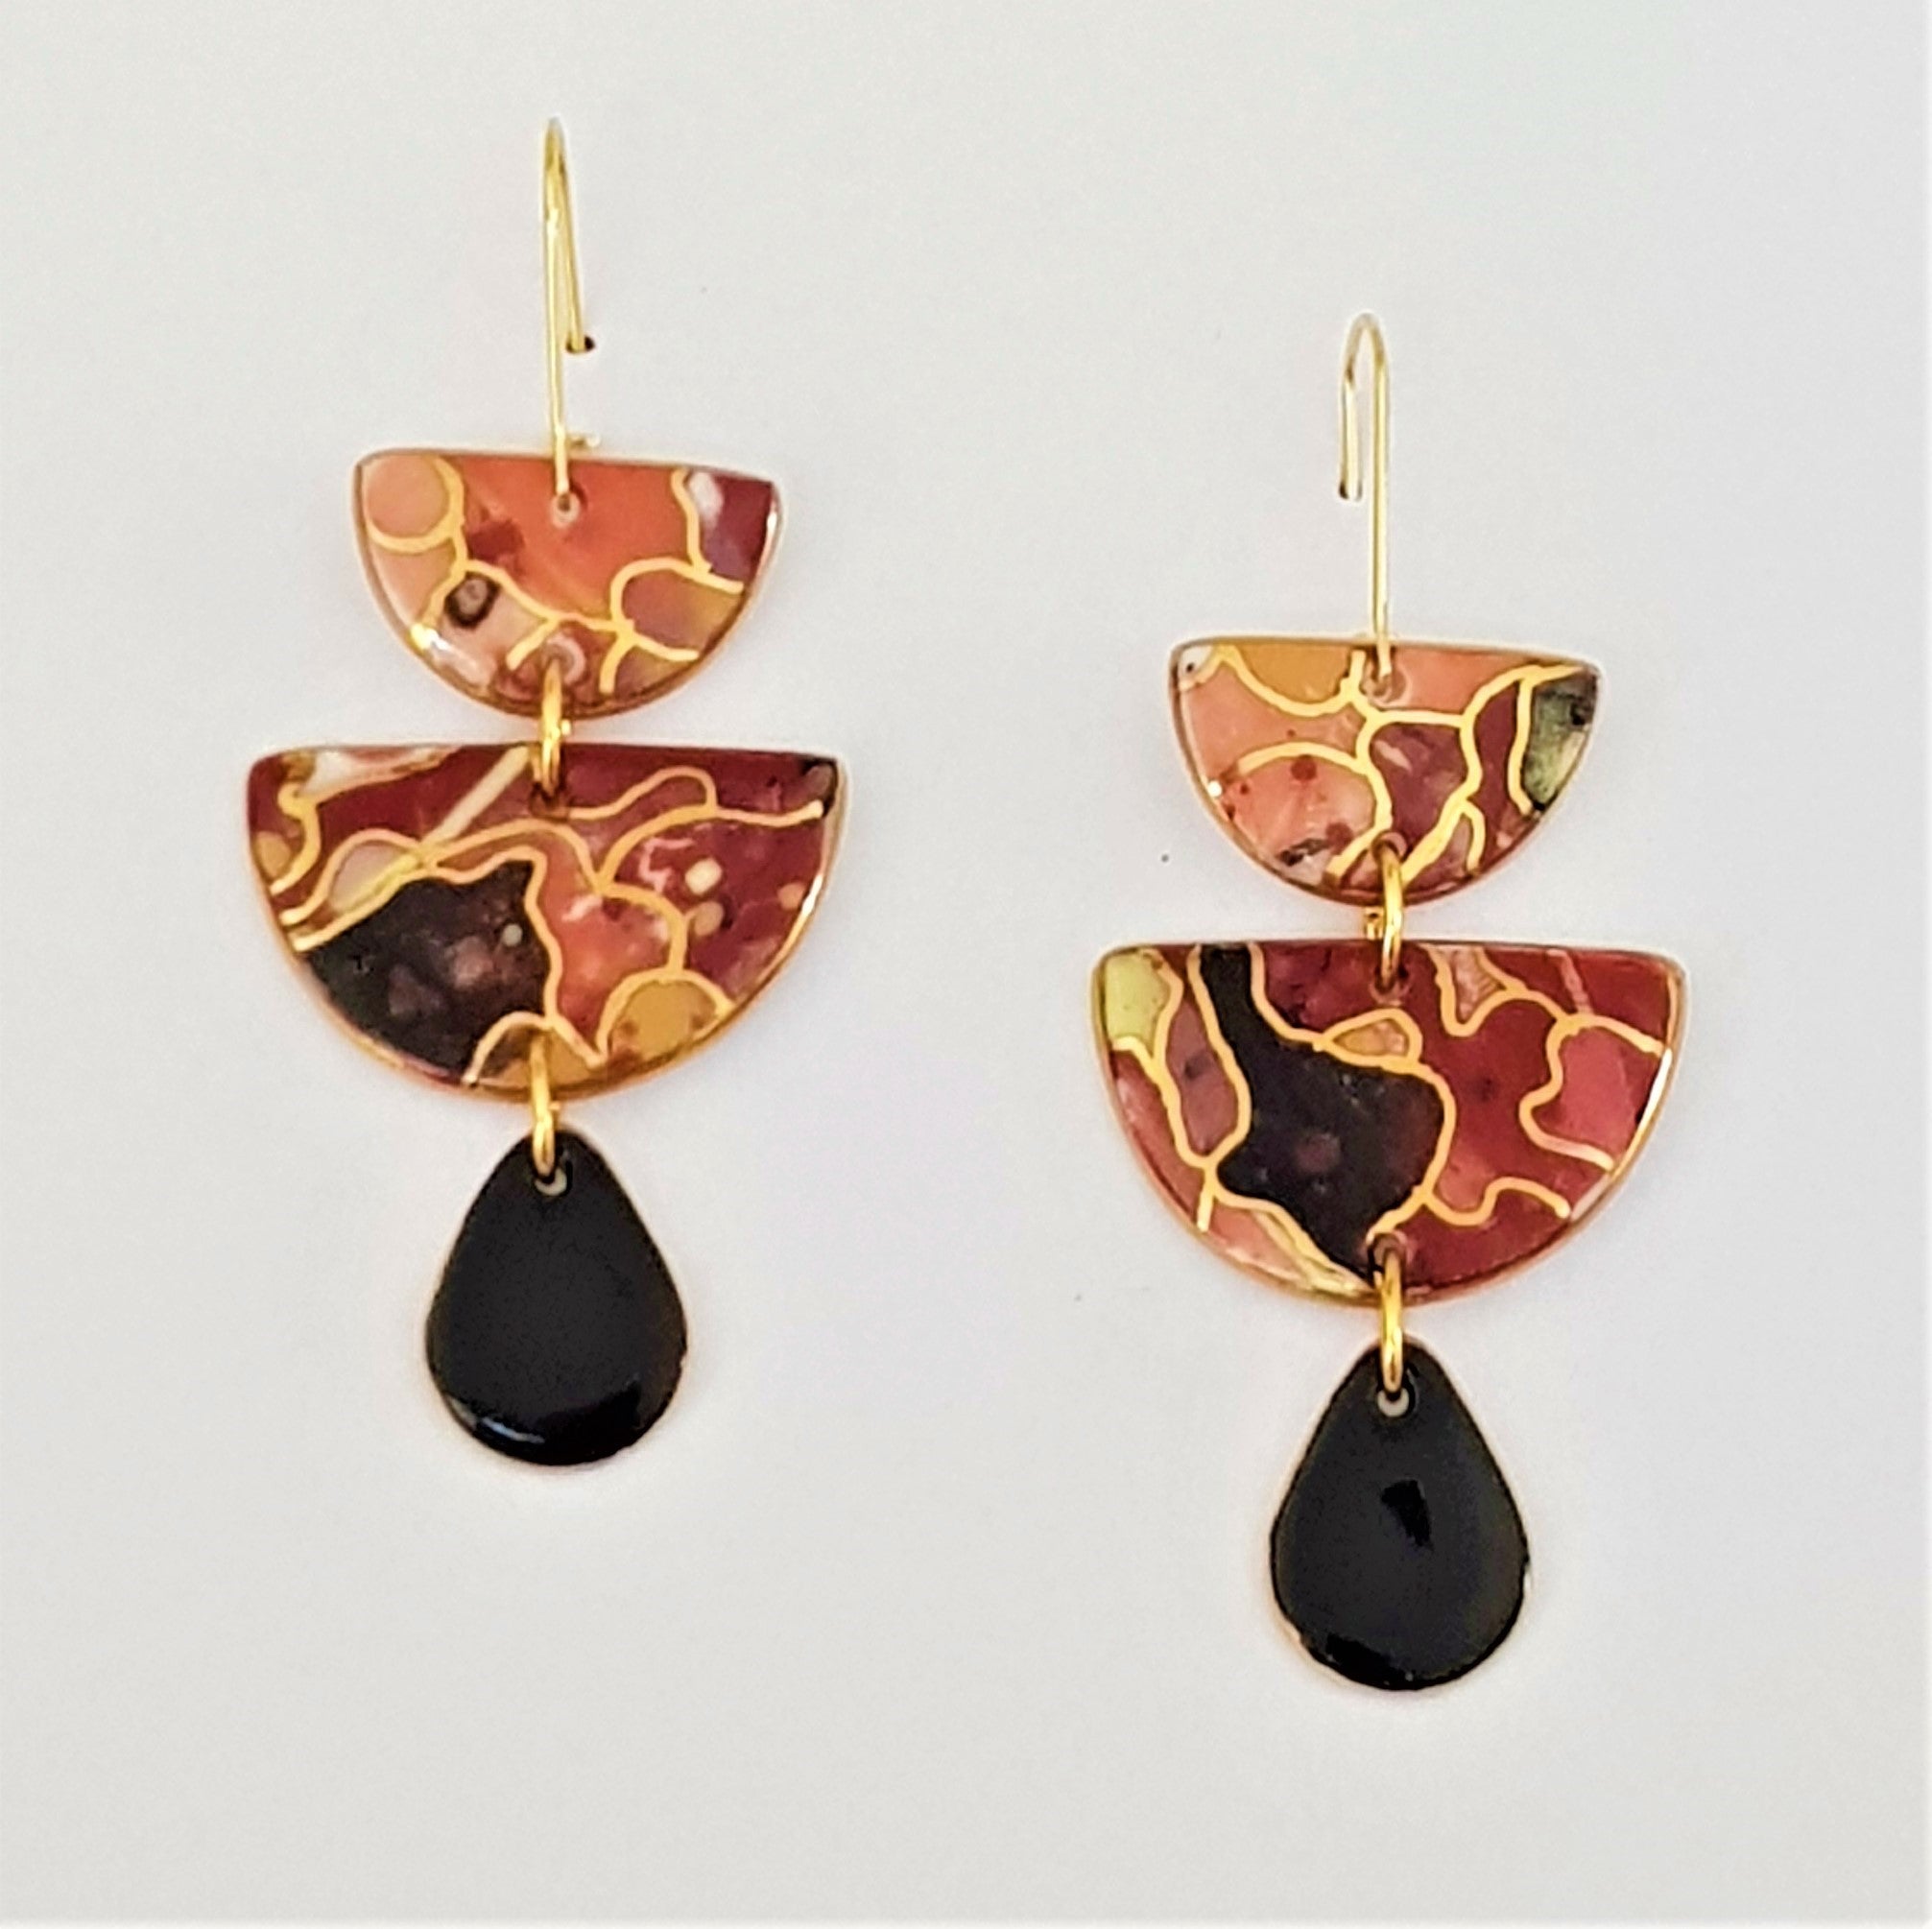 Triple drop earrings in warm tones and black with gold linework